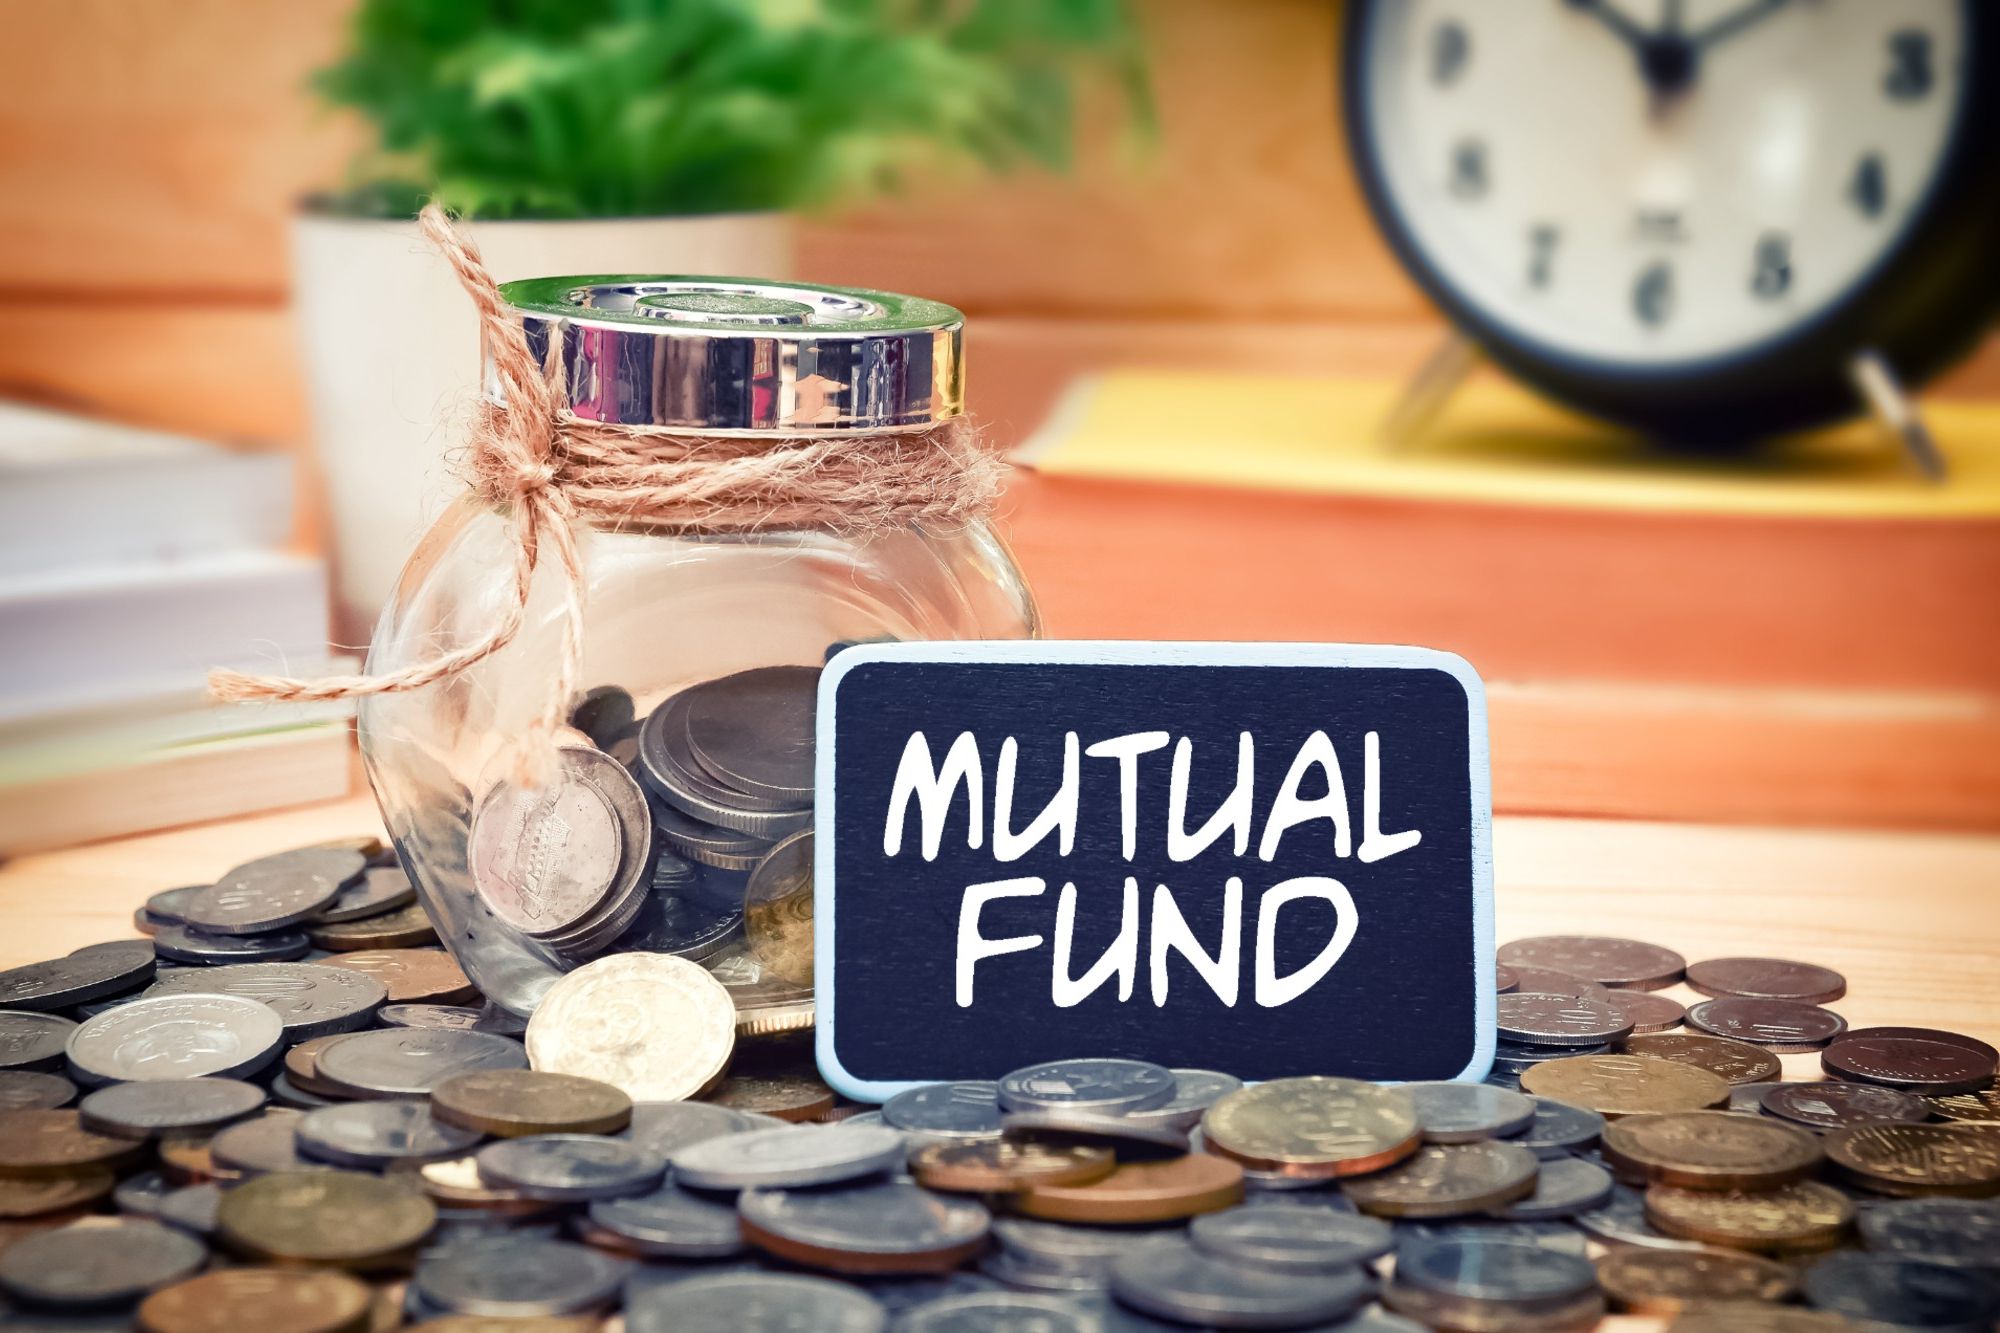 Tax implications of mutual fund investments